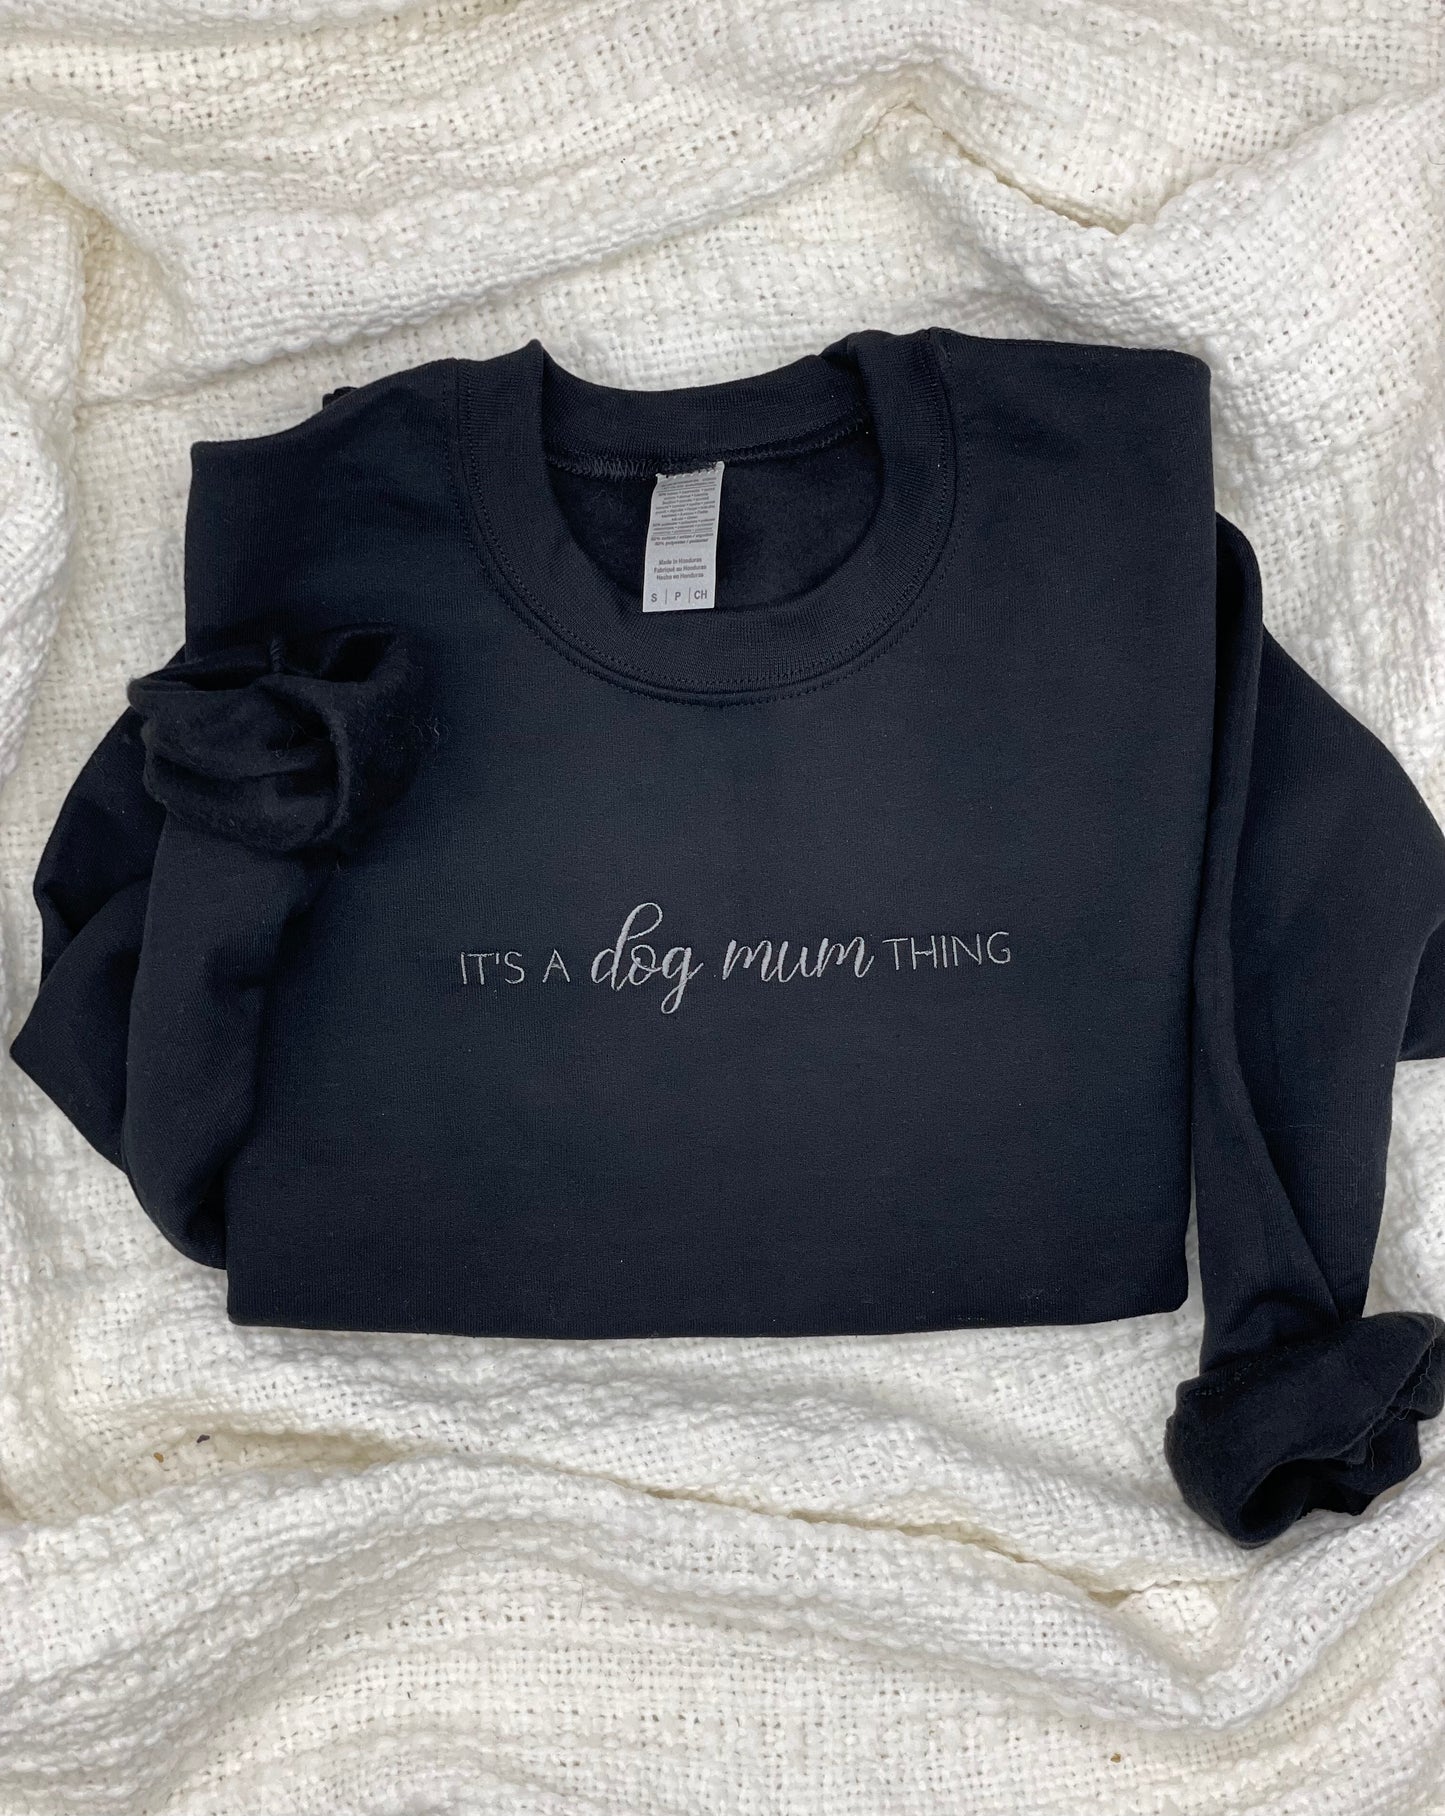 It’s a dog mum thing| Embroidered Hoodie & Sweatshirt